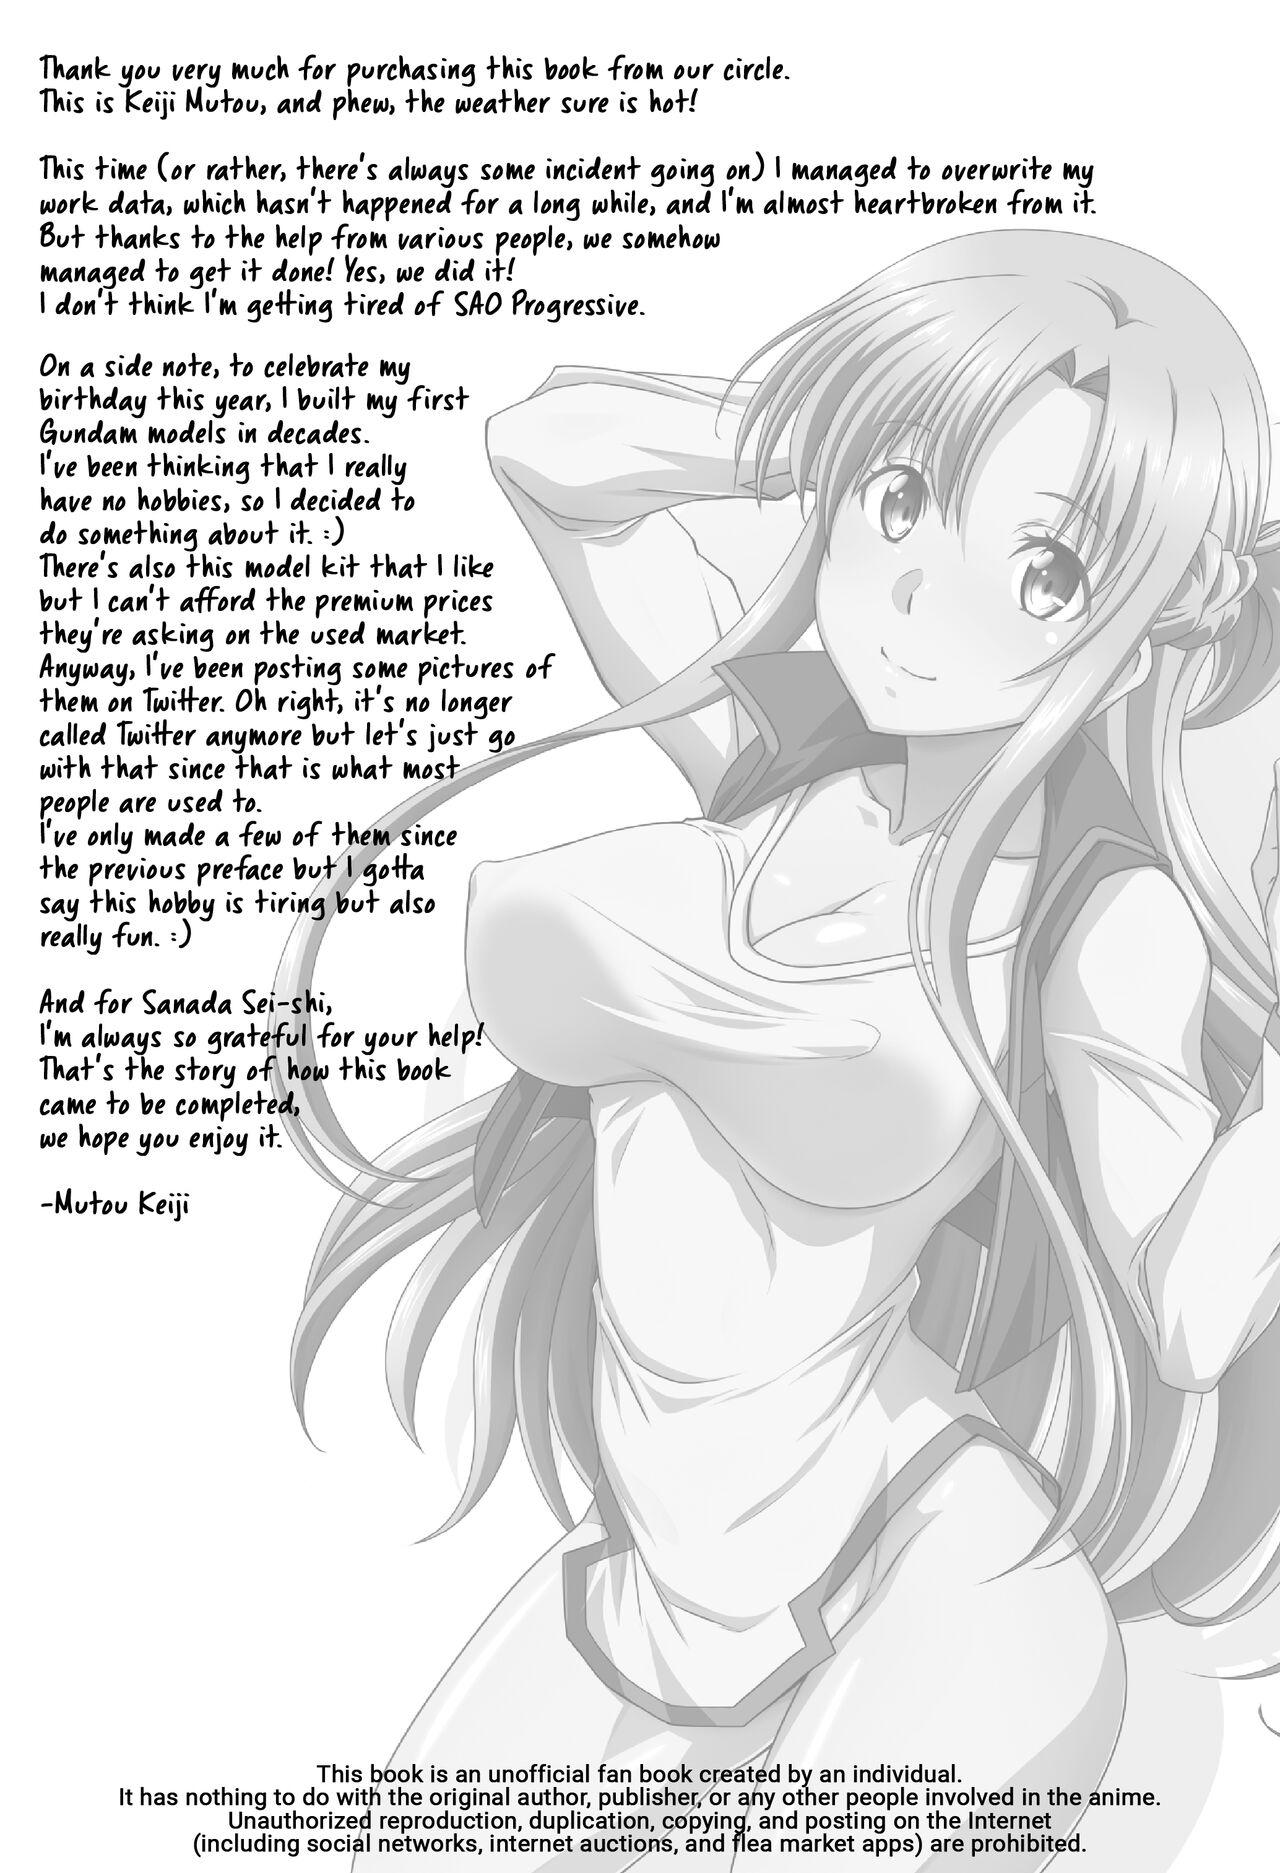 Slutty Astral Bout Ver. 47 - Sword art online First - Page 3